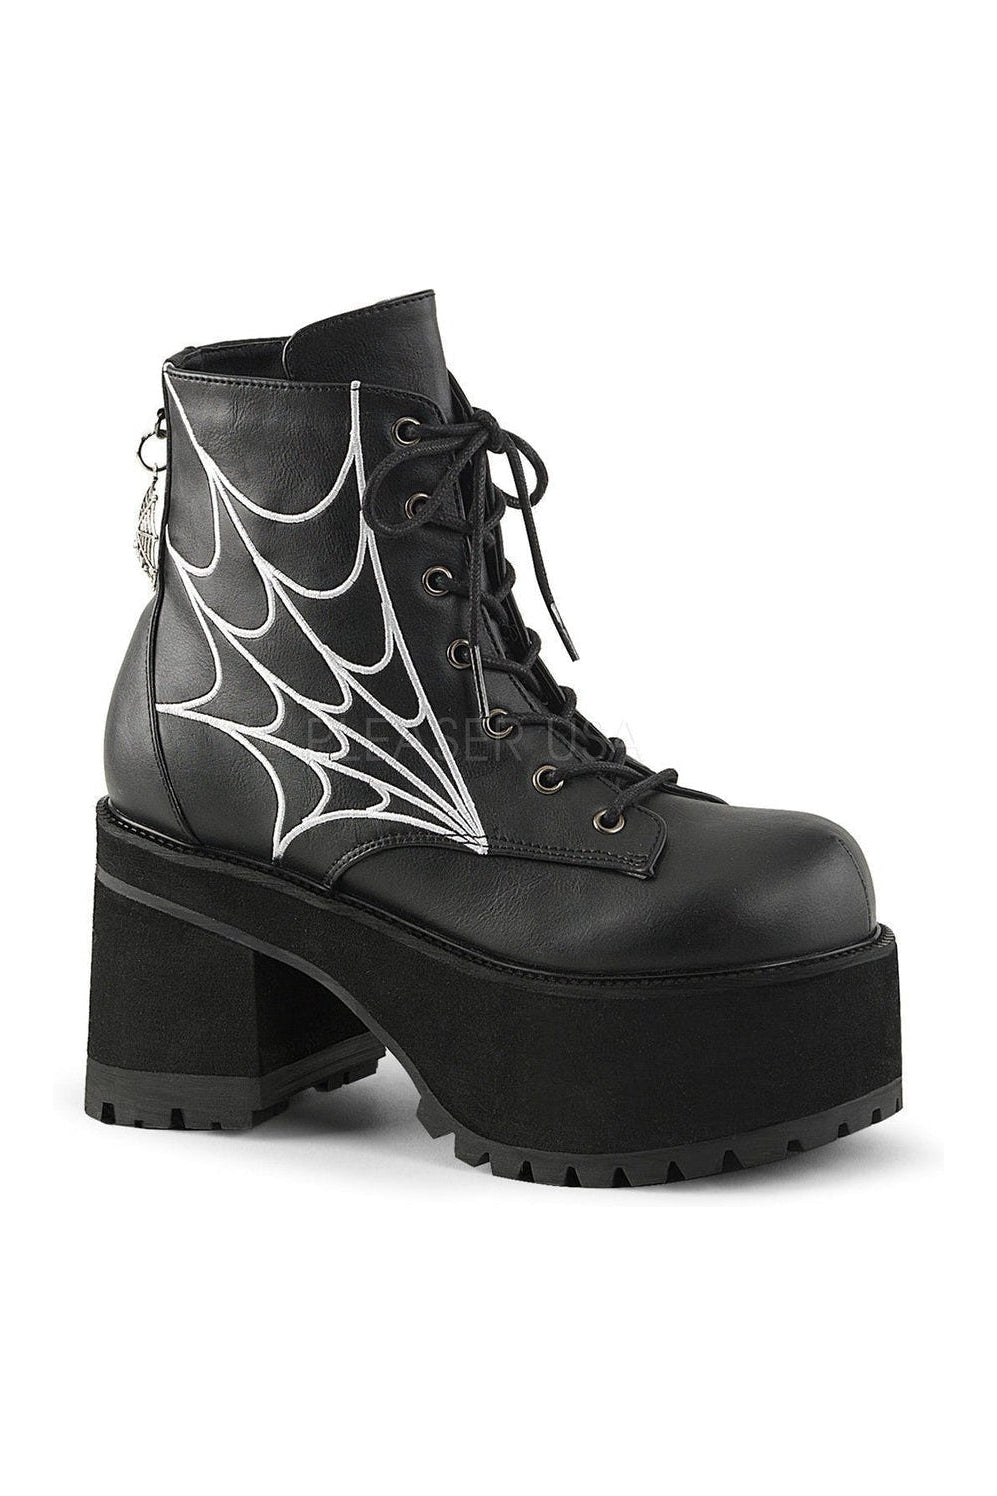 RANGER-105 Demonia Ankle Boot | Black Faux Leather-Demonia-Black-Ankle Boots-SEXYSHOES.COM